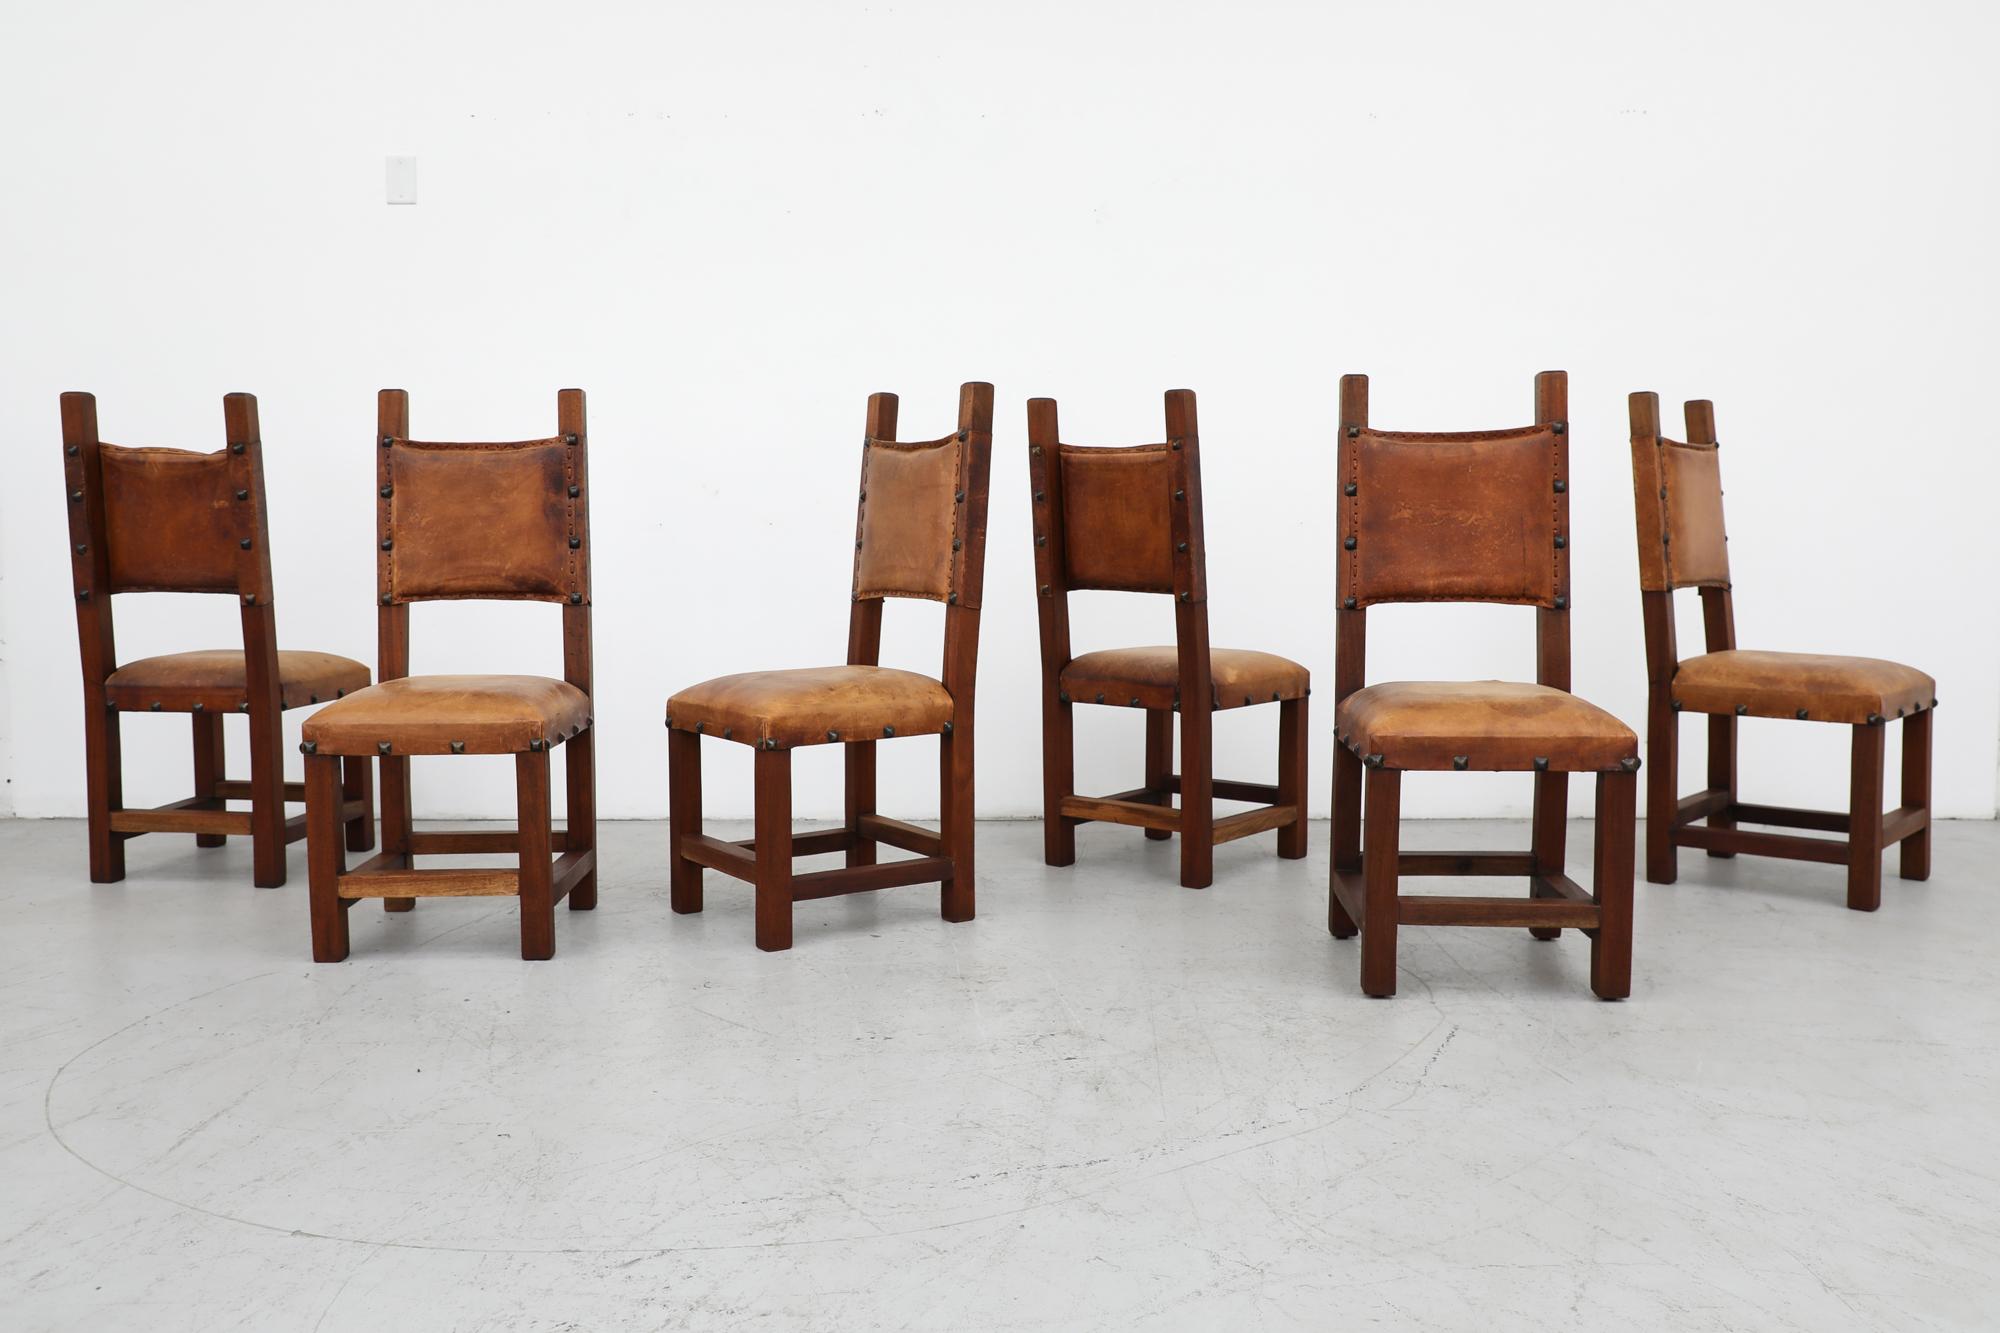 Set of 6 Mid-Century Spanish style Brutalist dining chairs. Leather seat and back rest on heavy wood frames with leather weaving detail and iron pyramid stud accents. In impressive original condition with some wear and visible patina consistent with